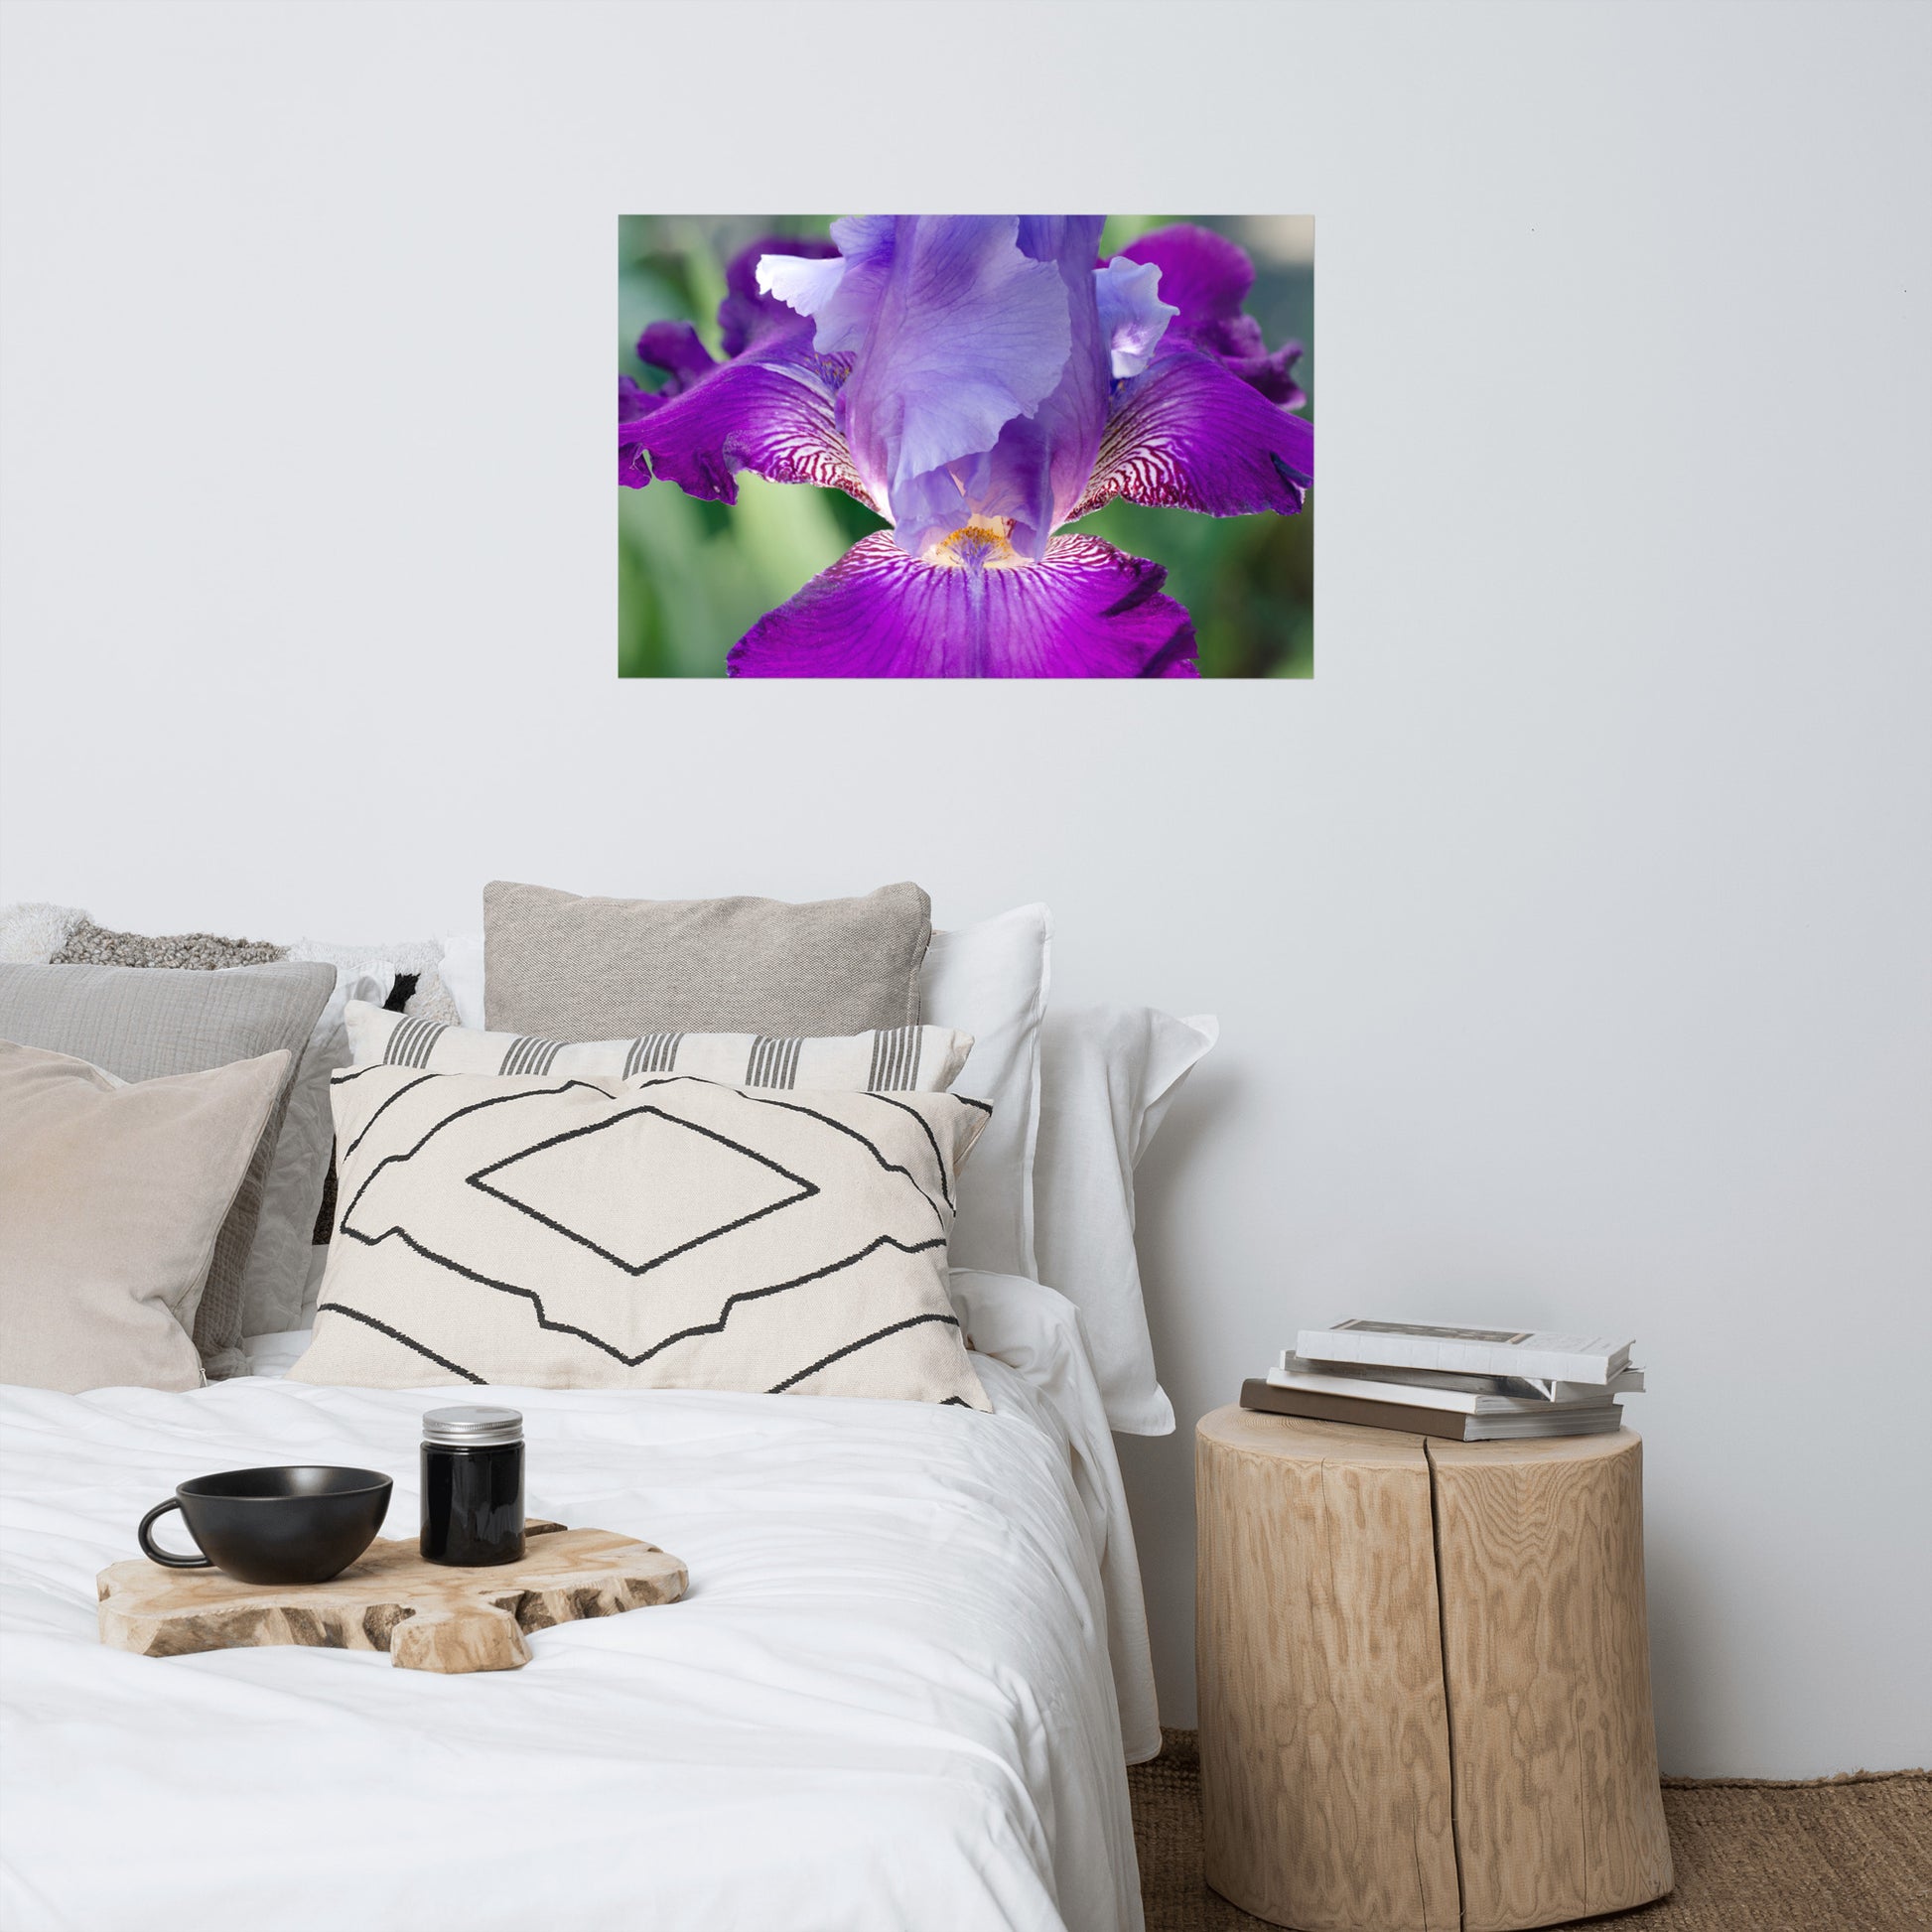 Big Wall Posters For Bedroom Amazon: Glowing Iris - Botanical / Floral / Flora / Flowers / Nature Photograph - Loose / Frameable / Unframed / Frameless Wall Art Print - Artwork